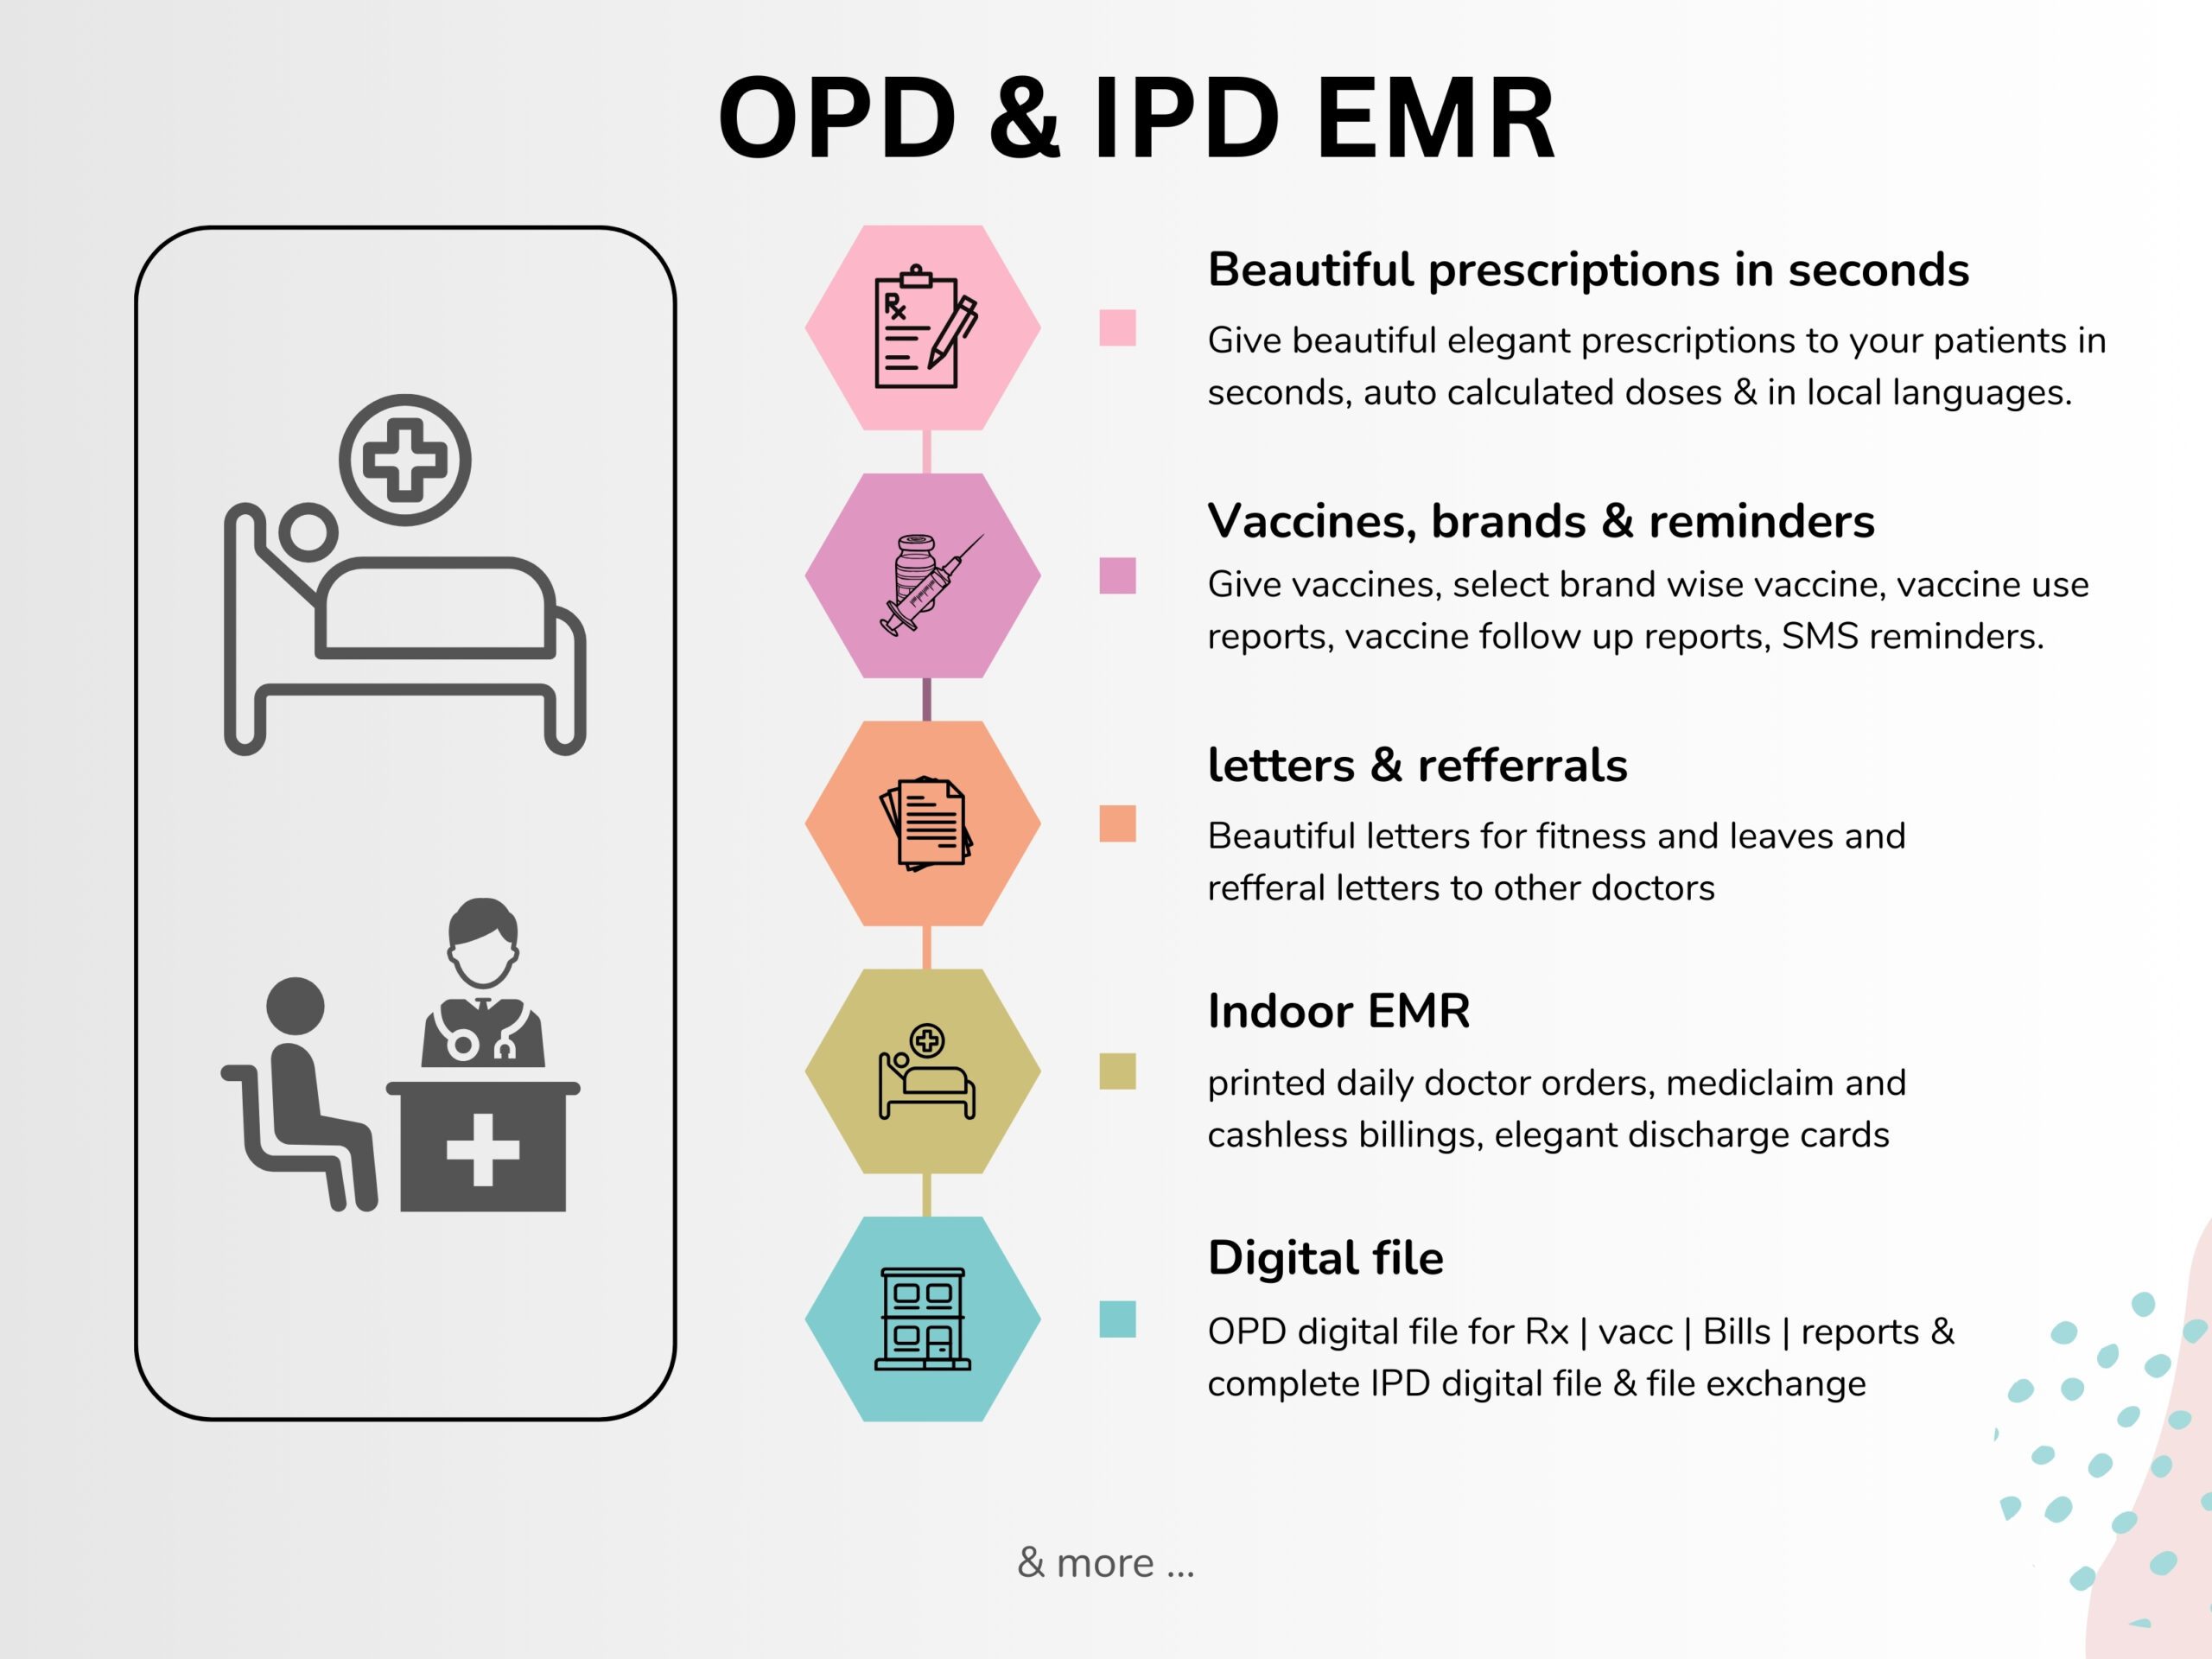 OPD and IPD EMR